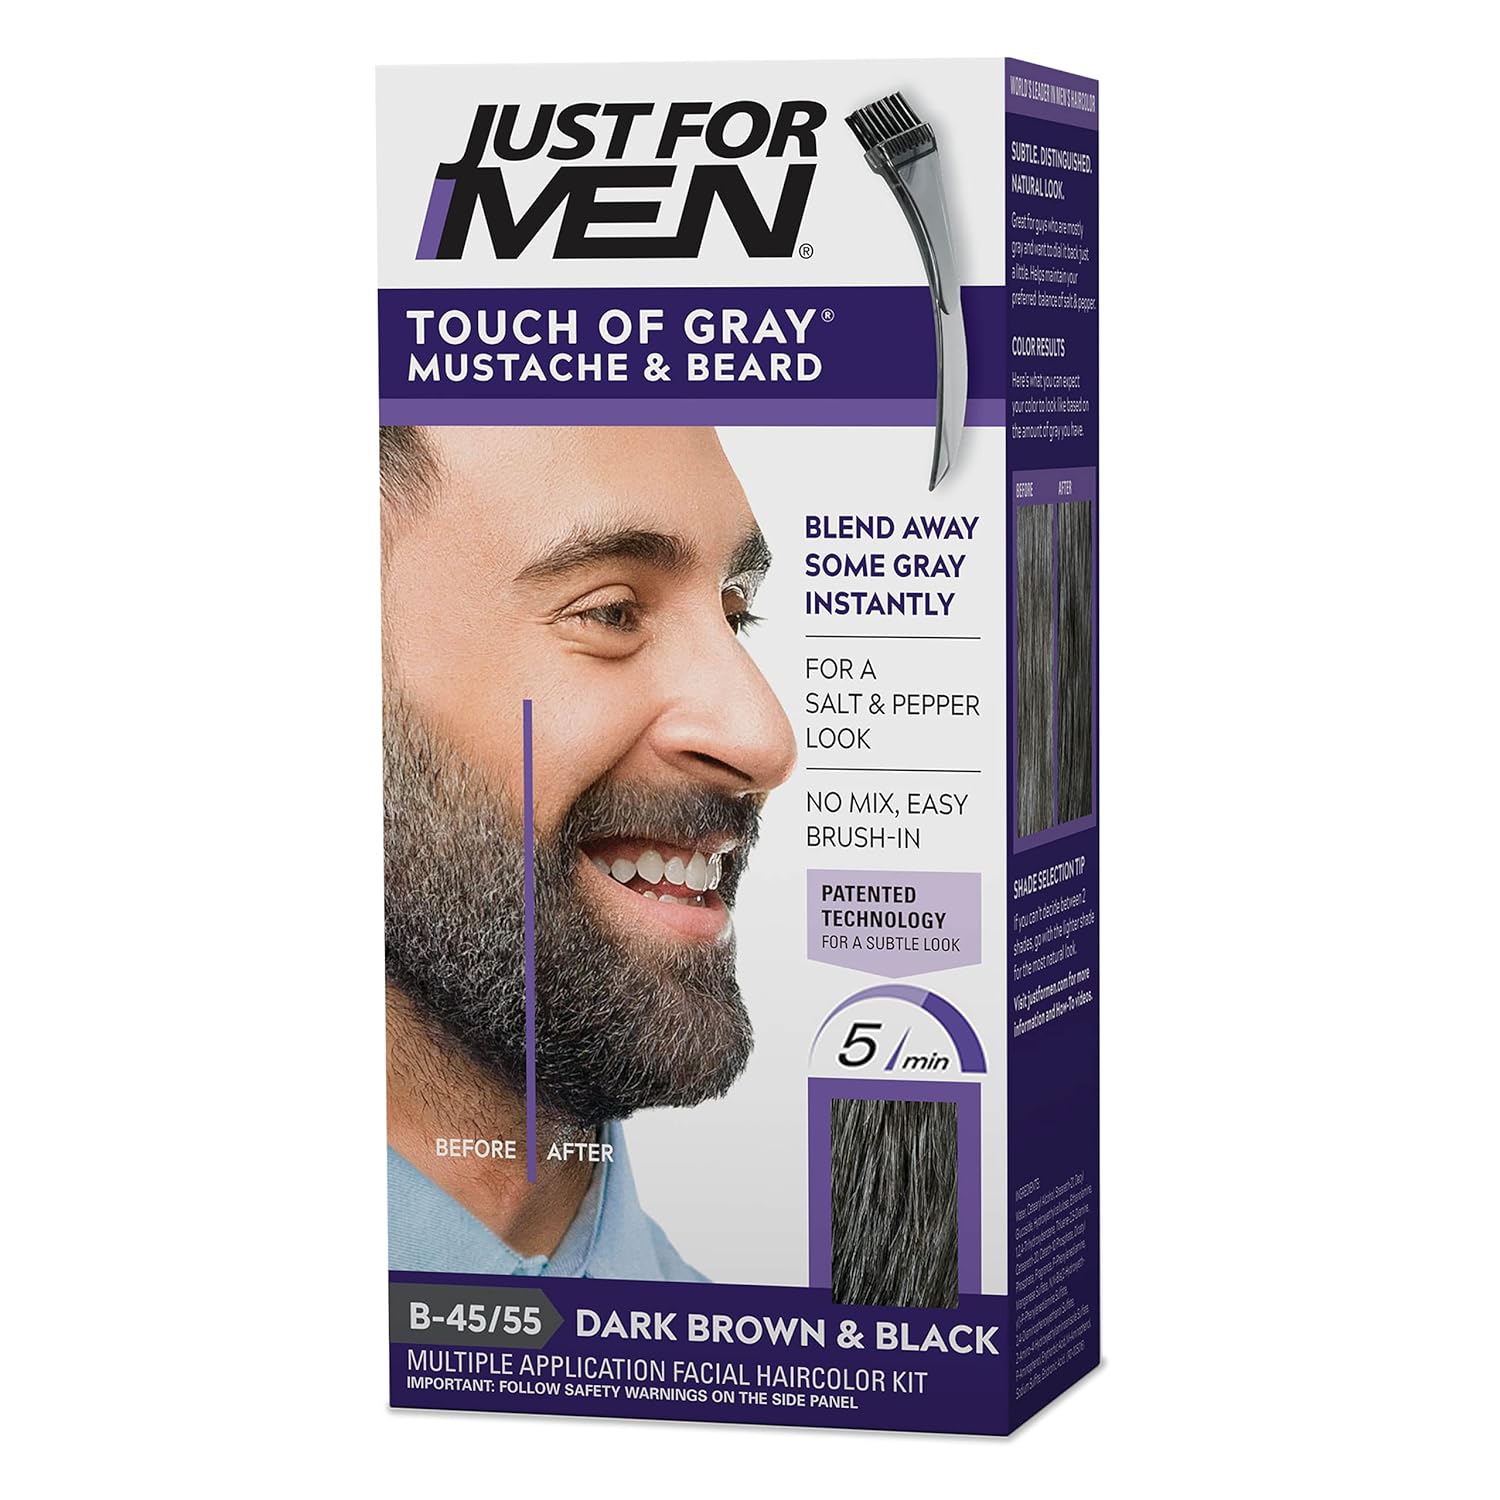 Just For Men Touch of Gray Mus…